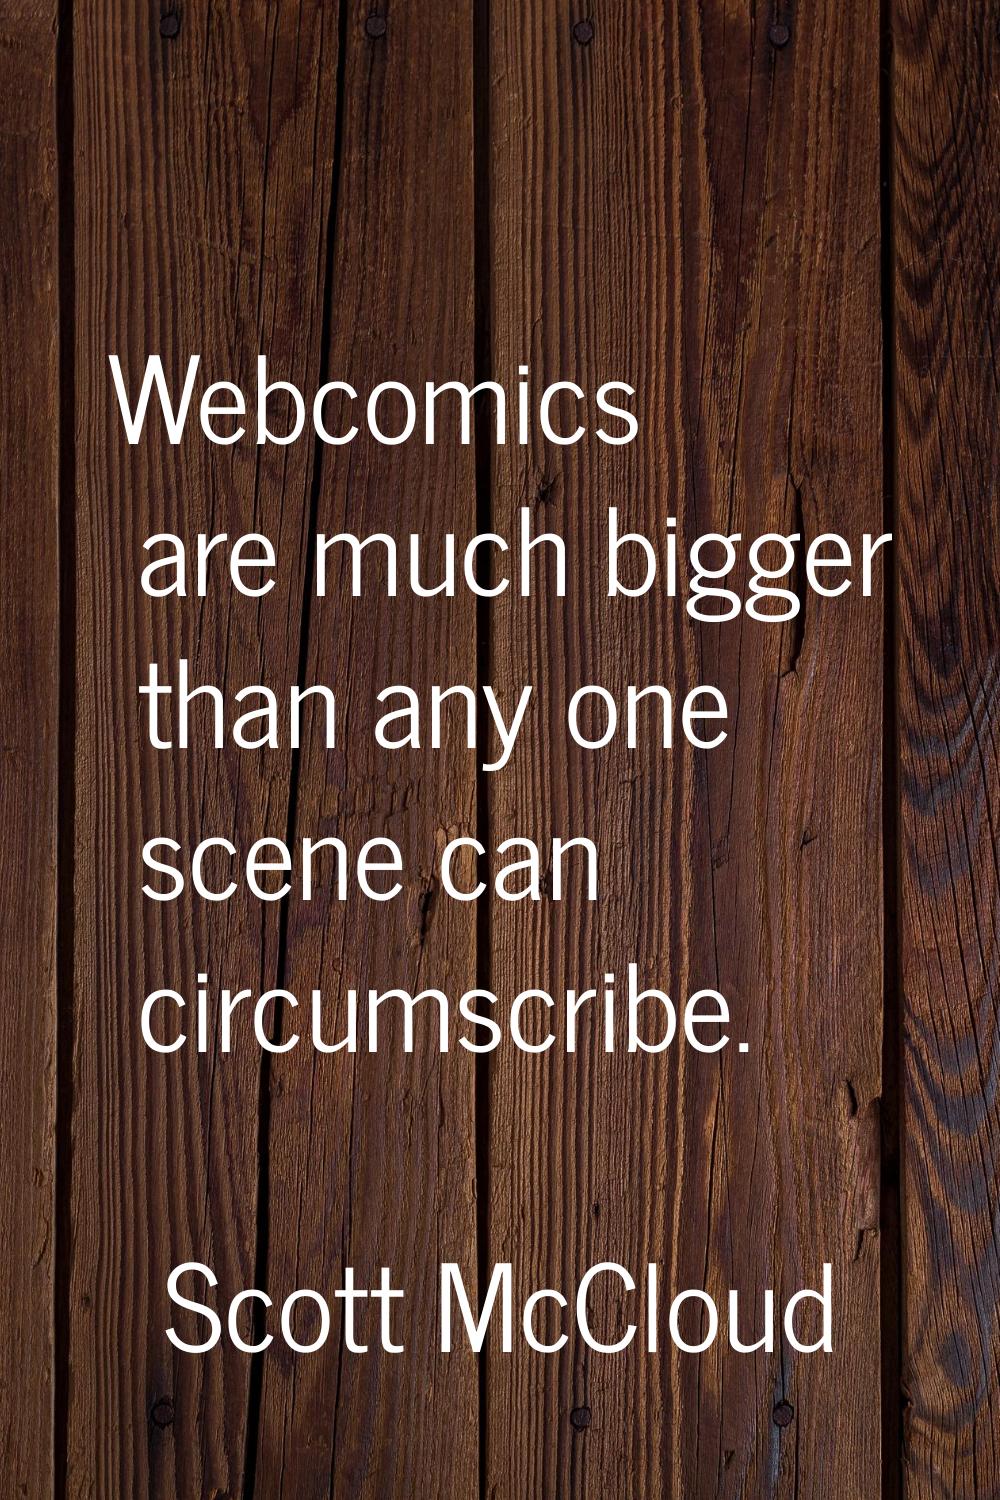 Webcomics are much bigger than any one scene can circumscribe.